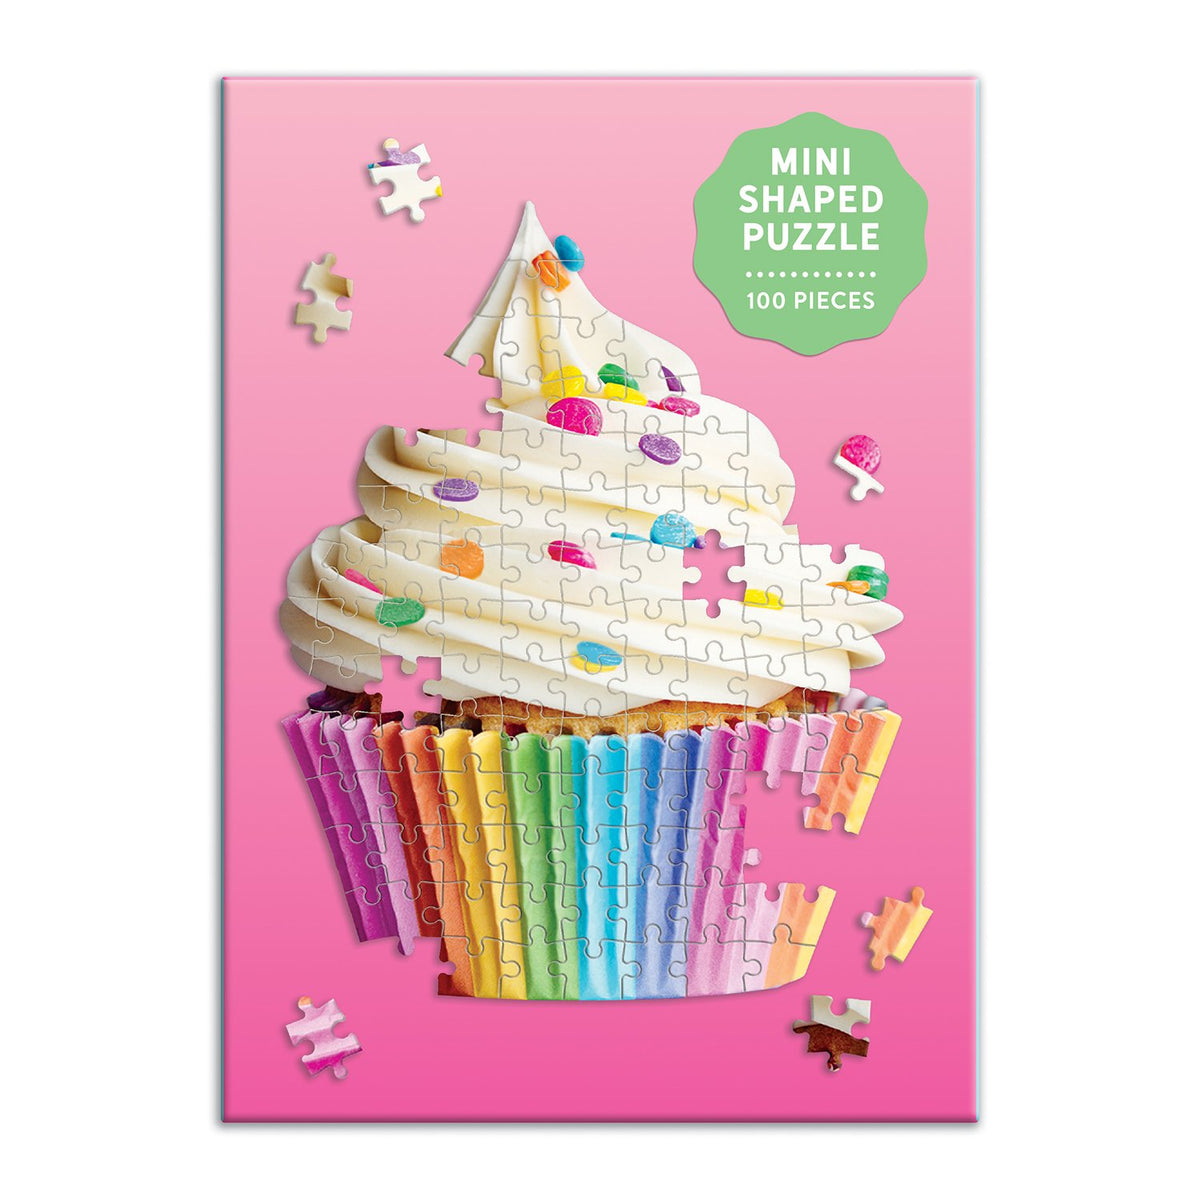 You're Sweet Cupcake 100 Piece Mini Shaped Puzzle Mini-Shaped Puzzles Galison 